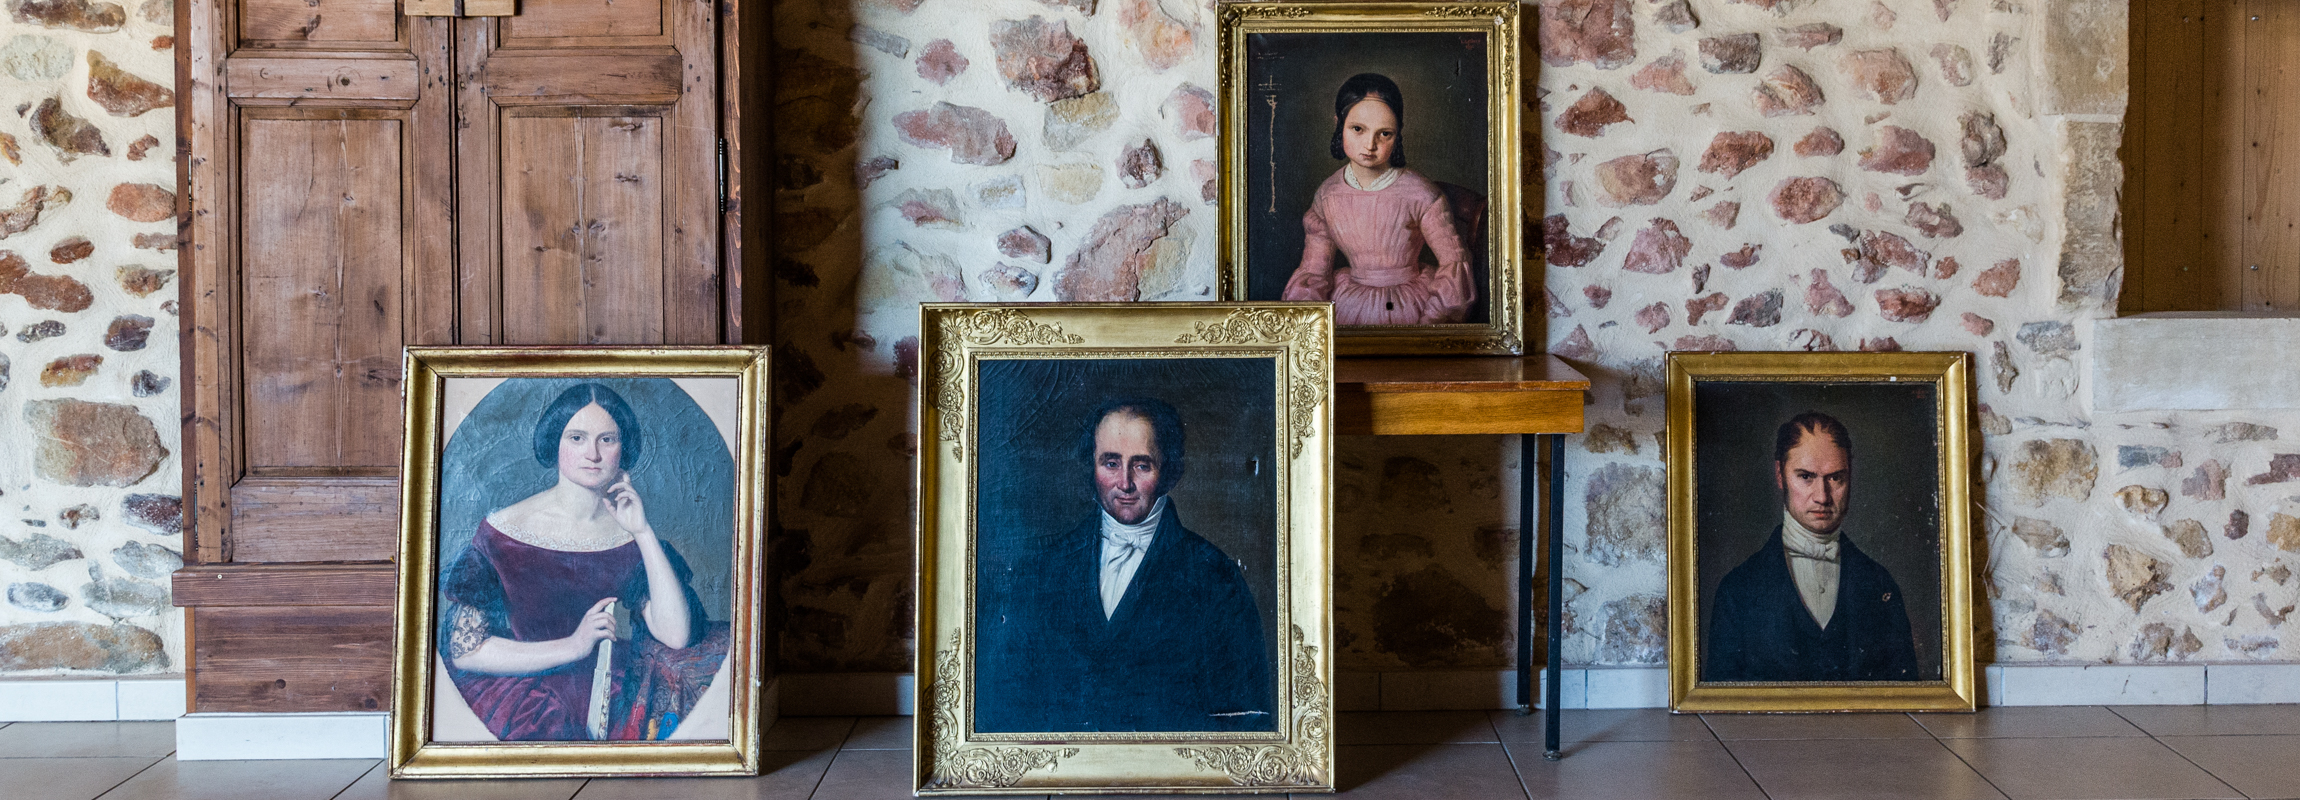 Four portraits show the builder of Chateau de Montcaud, Alexandre Eugène Collain, and three of his descendants. Located in Provence, Southern France, the property was first converted into a hotel in the 1990s and reopened in summer 2018 after extensive renovation.